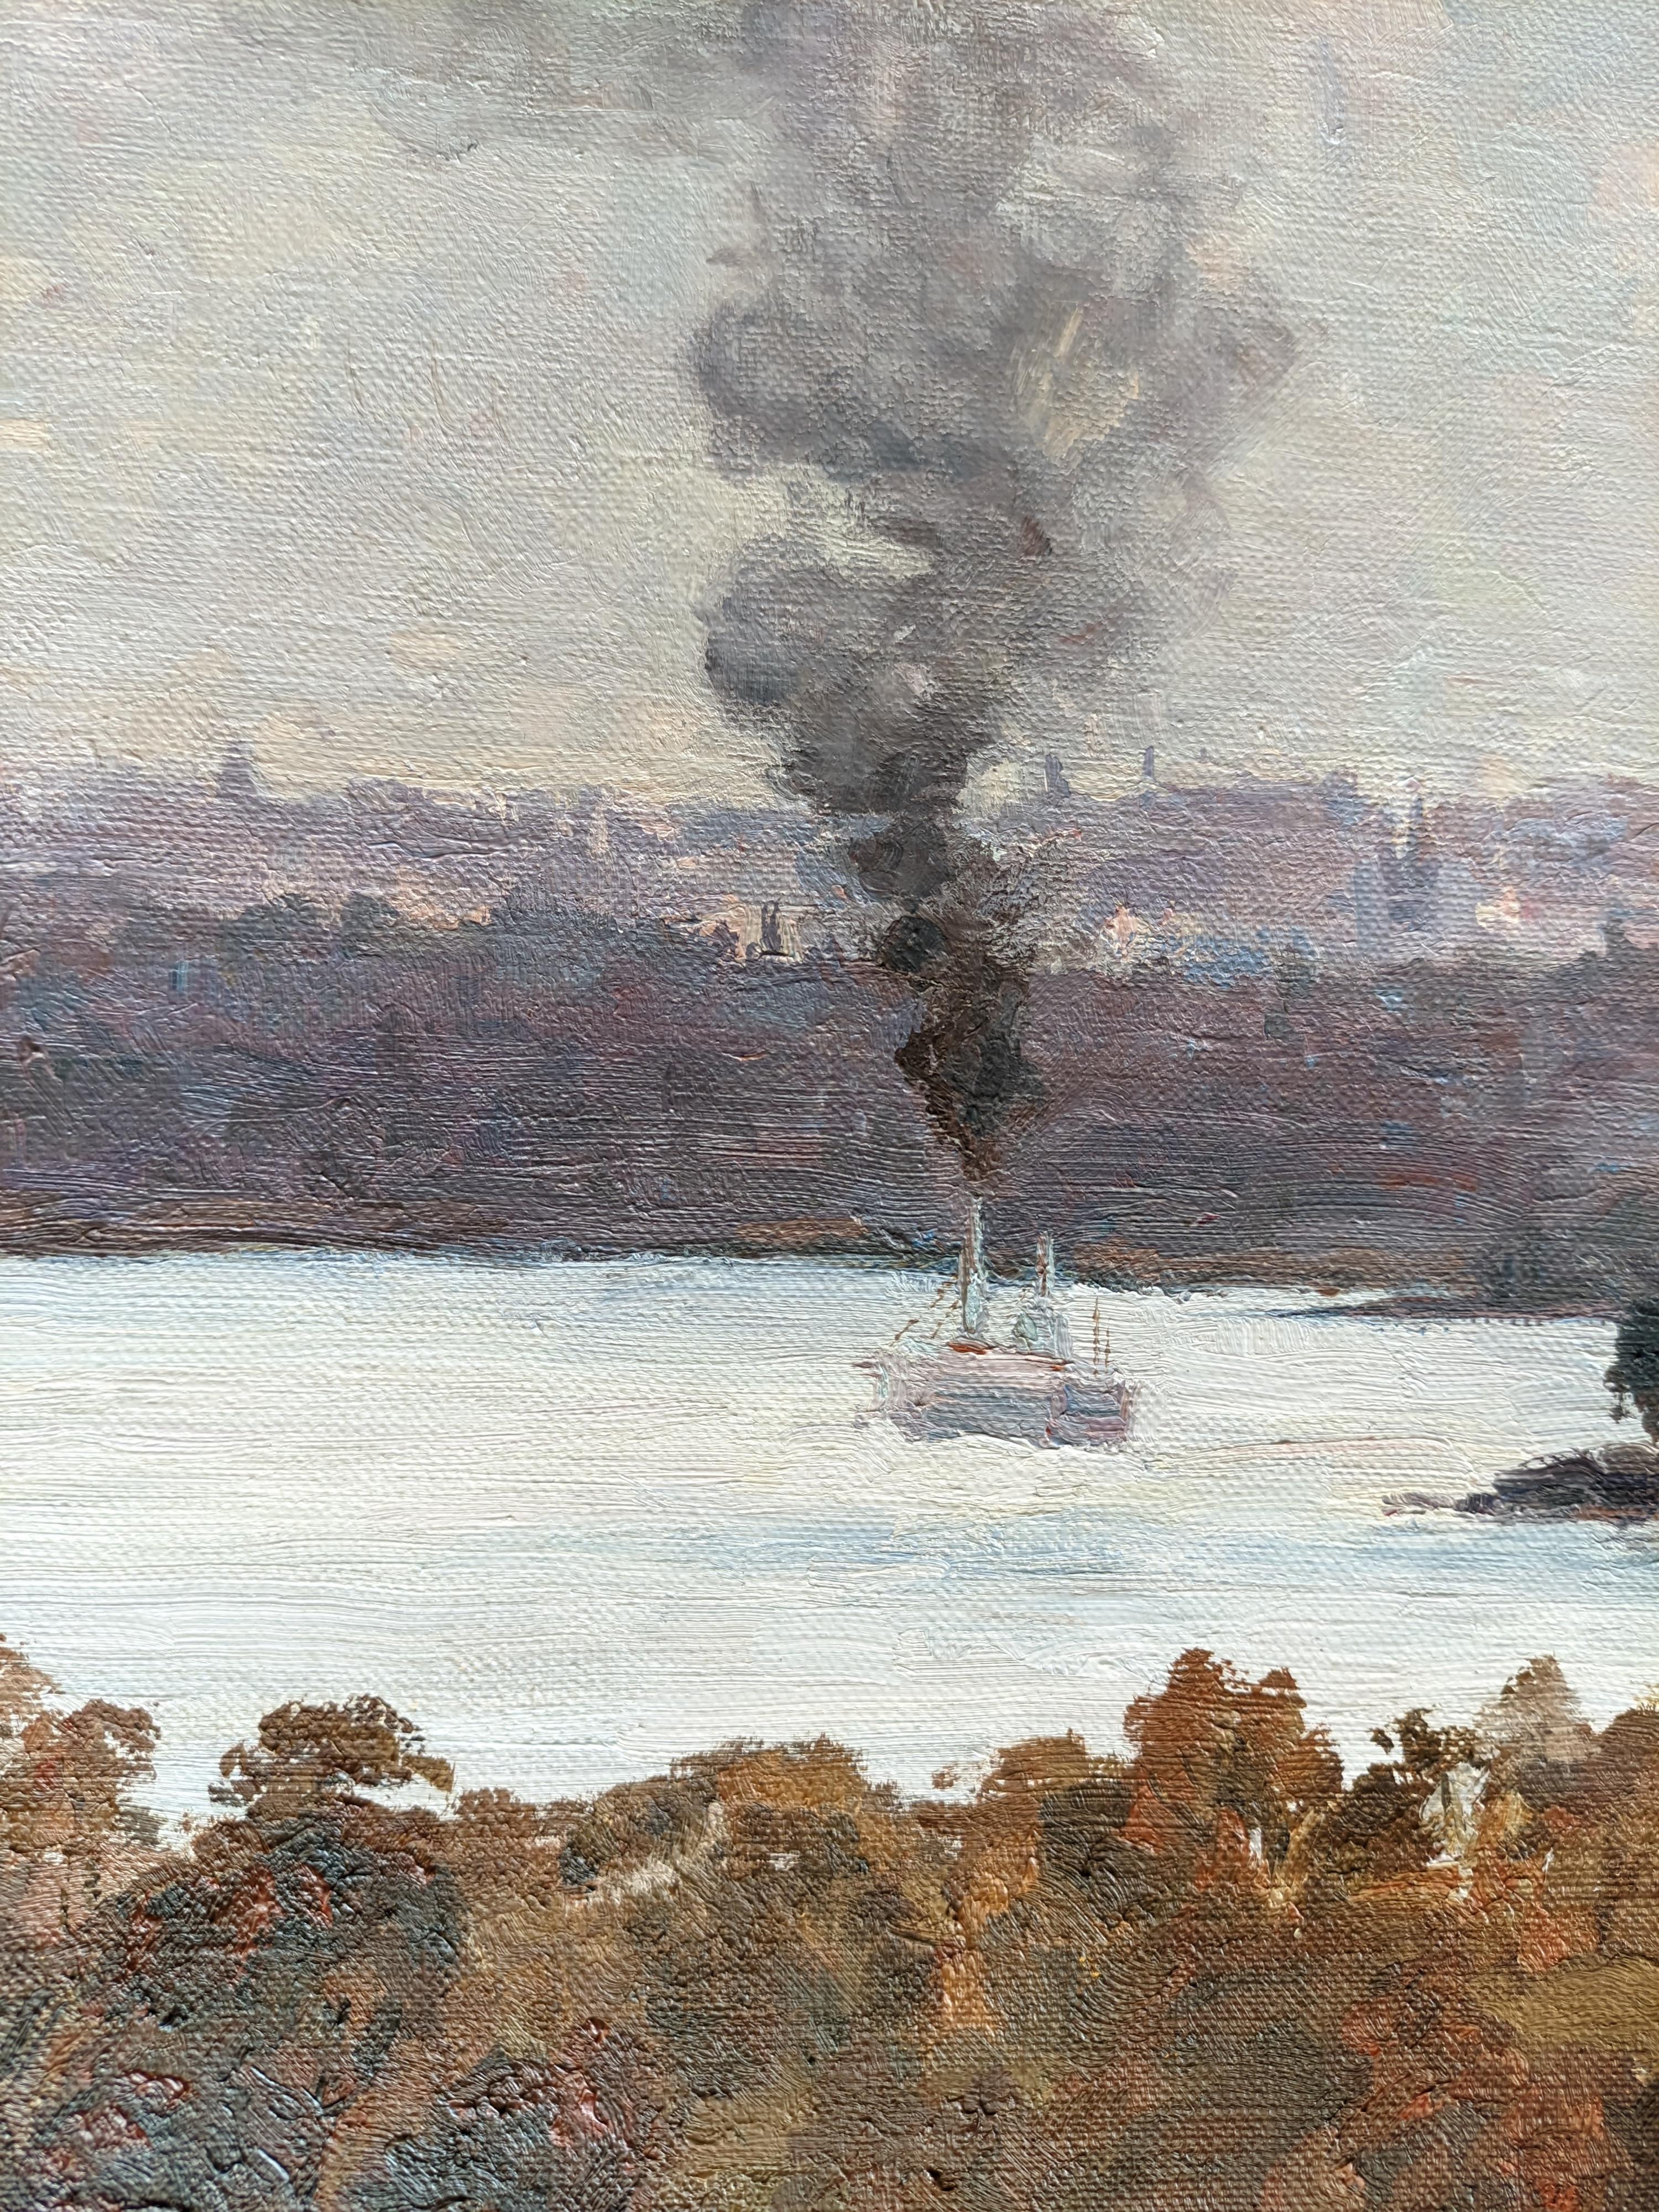 View of the bay. Sydney Landscape oil painting by Evgeny Kislenko 2